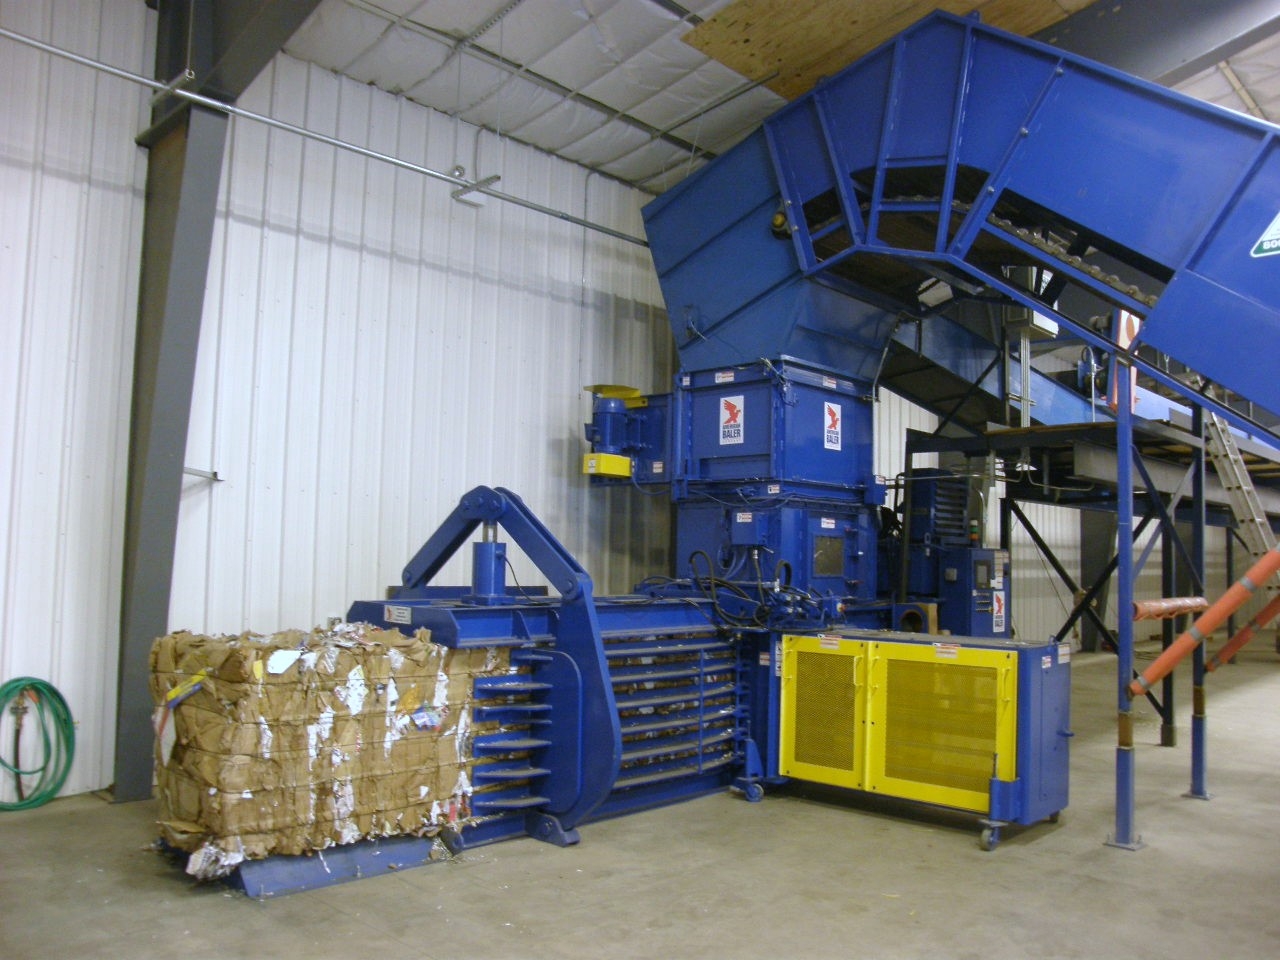 42WS Baler Shown with Baler Feed Conveyor and Optional Fluffer